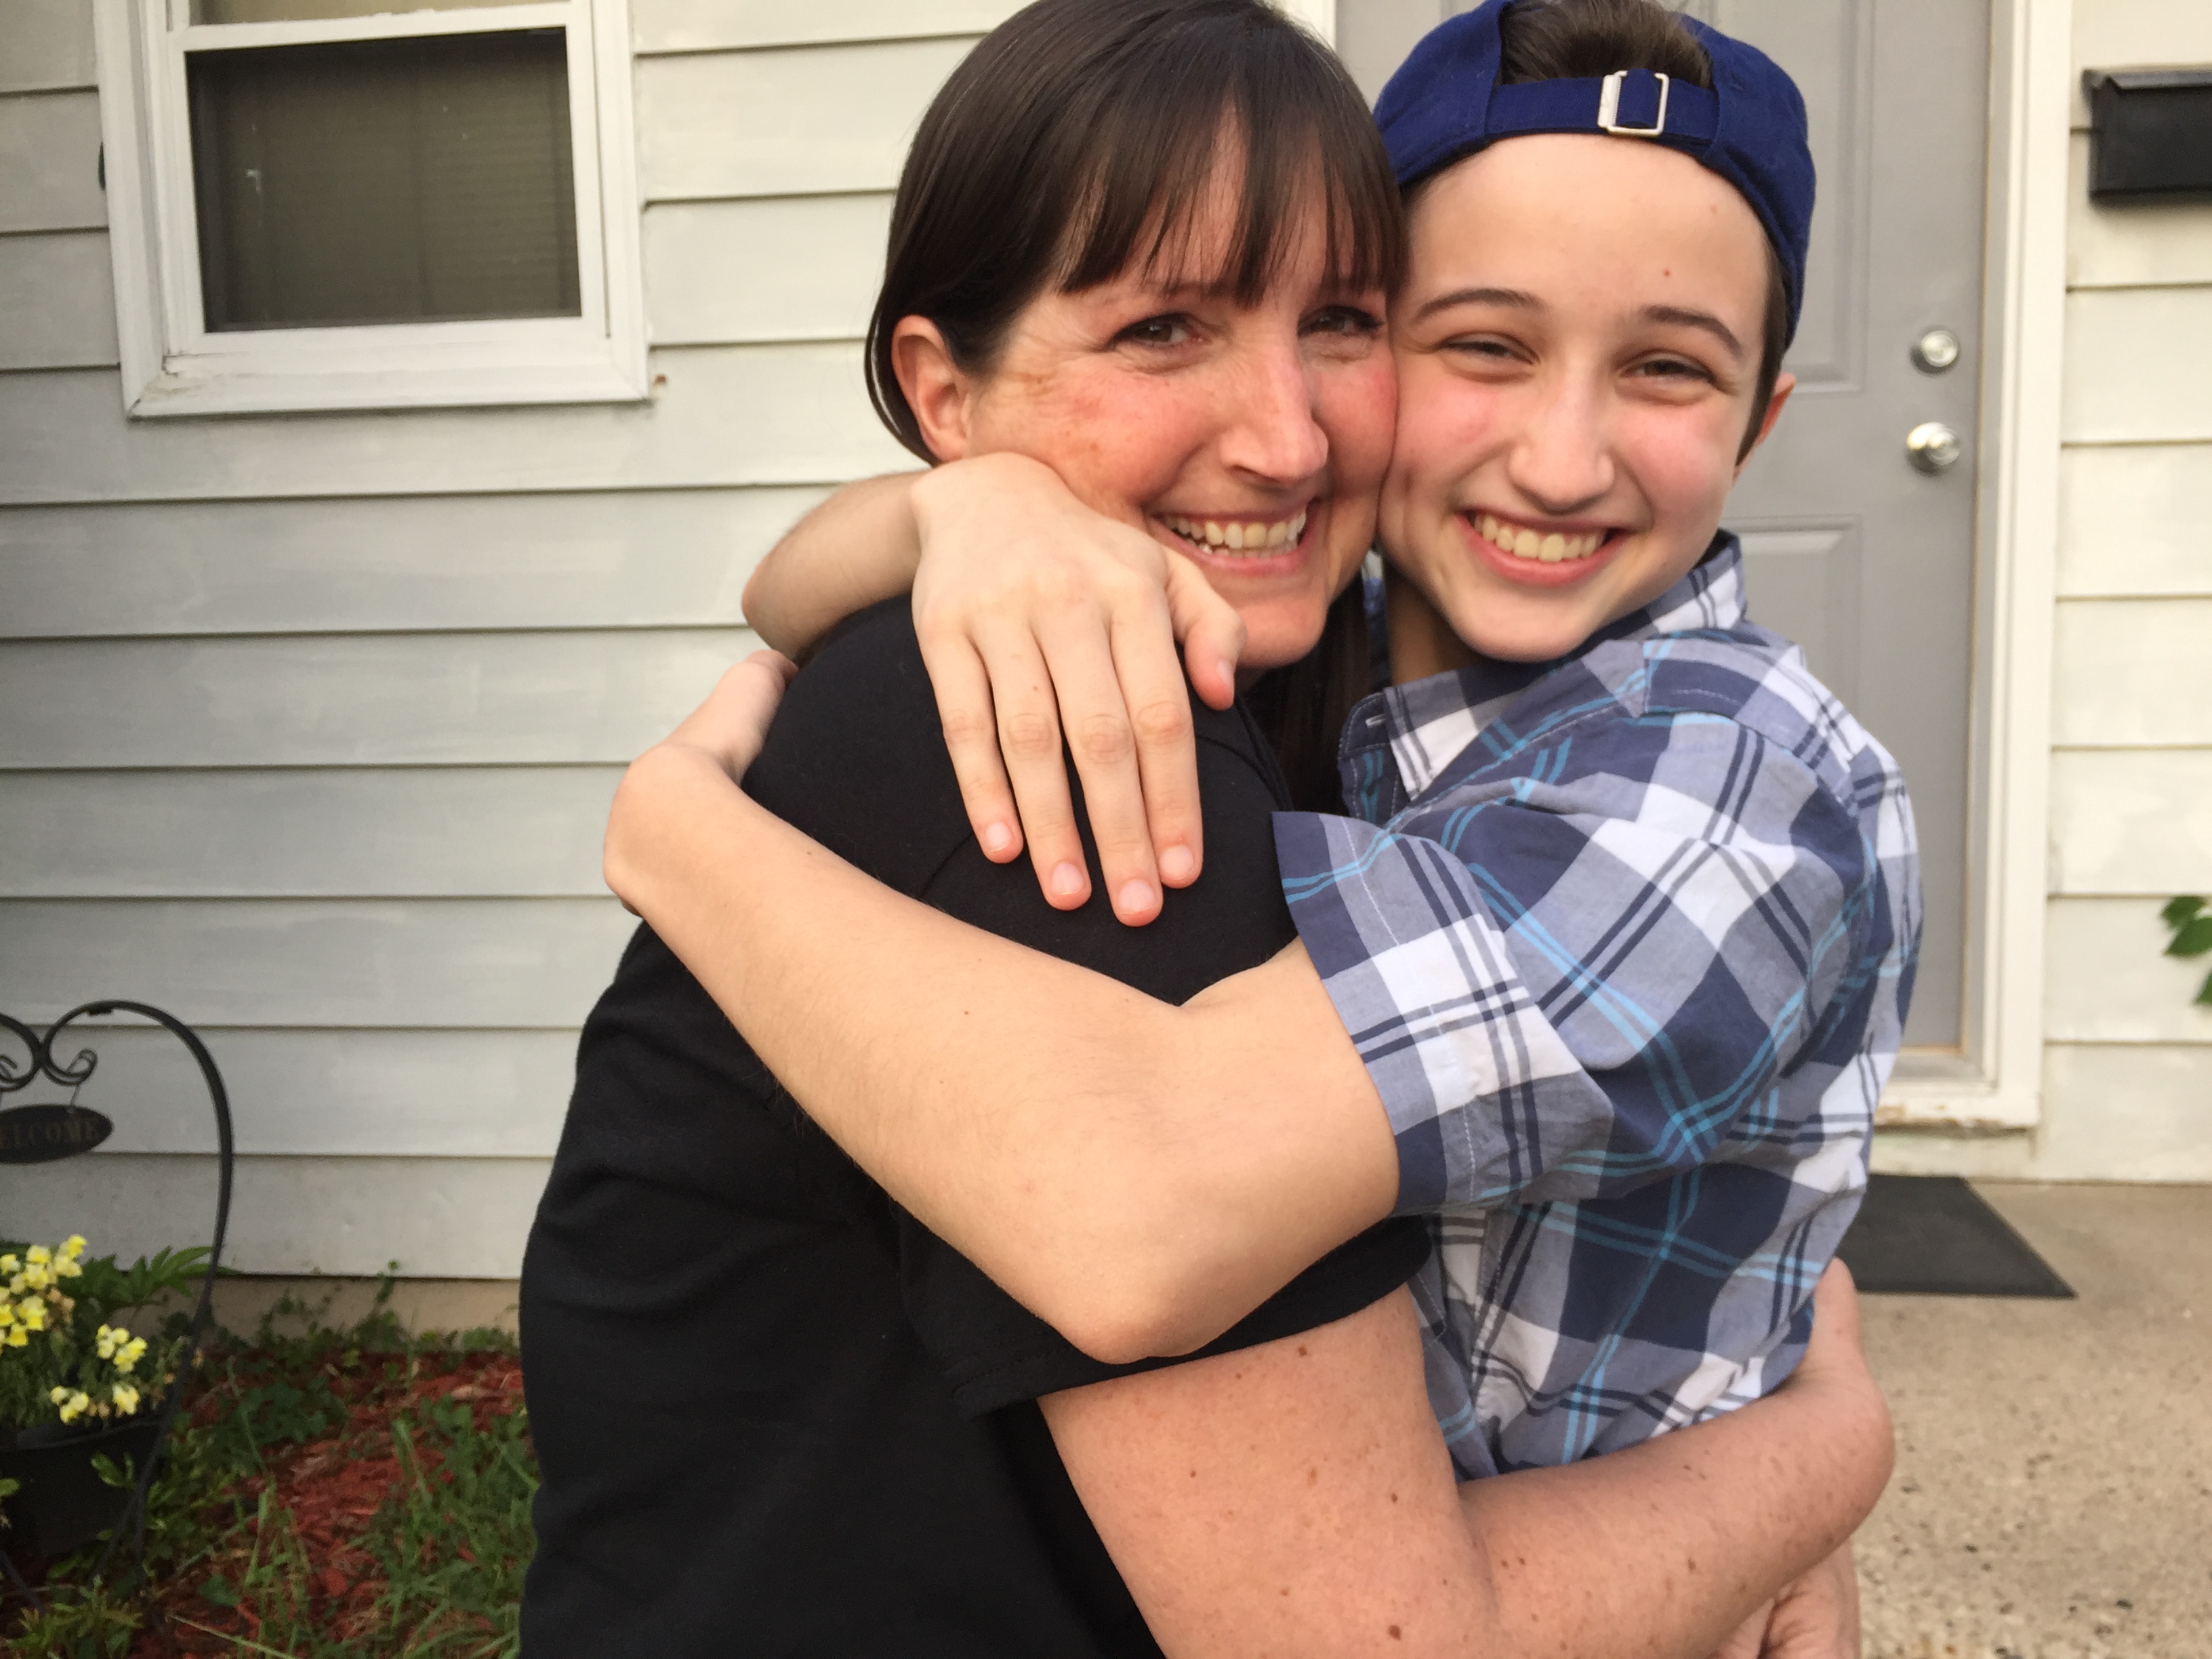 TLC client Ash Whitaker hugs his mom as they smile outside their house